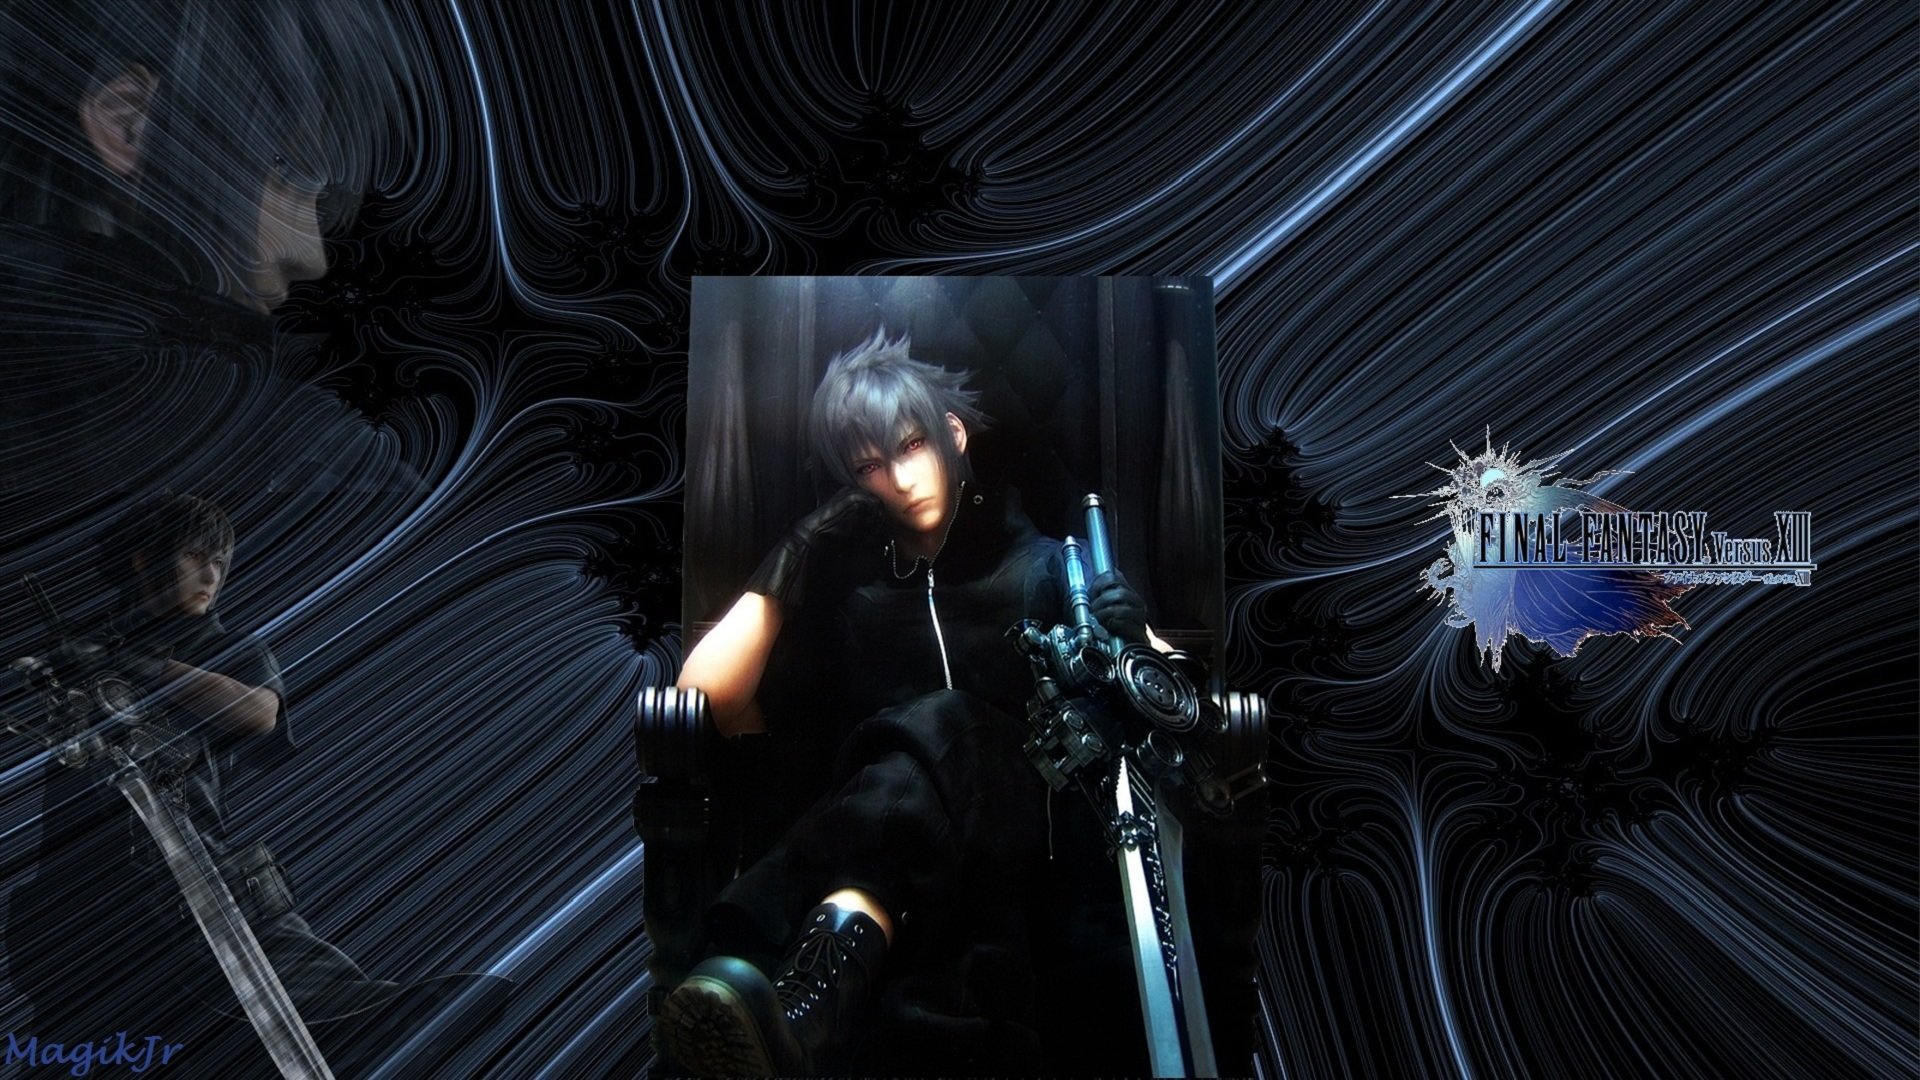 150+ Final Fantasy XV HD Wallpapers and Backgrounds